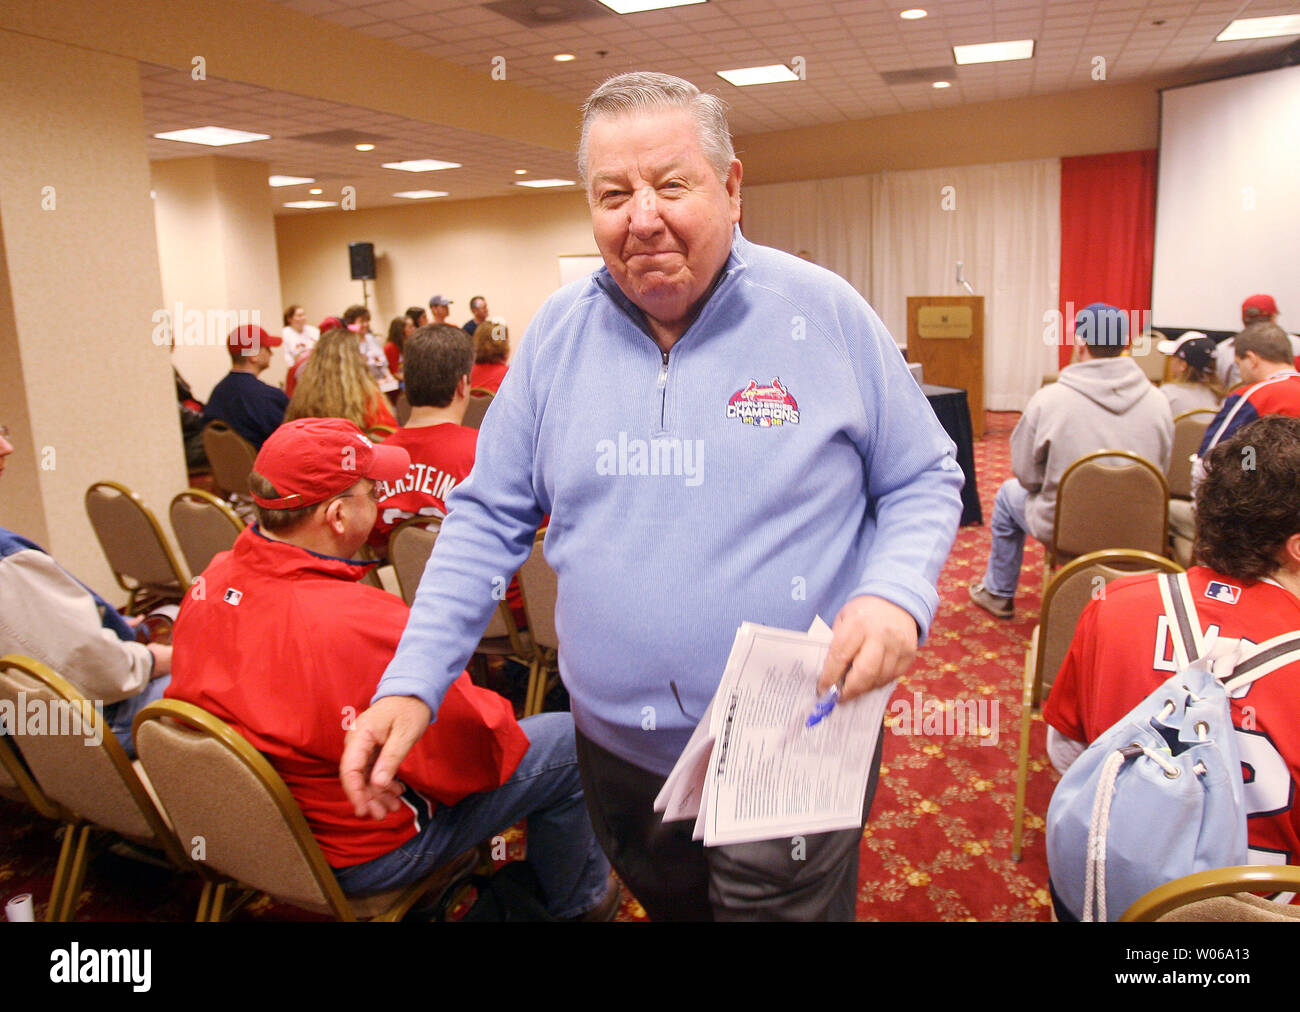 Former NBC golf announcer and Flordia Marlins play-by-play man Jay Randolph, says hello to those that have come to listen to his sports broadcasting session during the Cardinals Winter Warm-Up in St. Louis on January 14, 2007. Randolph has been rehired by KSDK TV to broadcast Cardinals games for the 2007 season.  (UPI Photo/Bill Greenblatt) Stock Photo